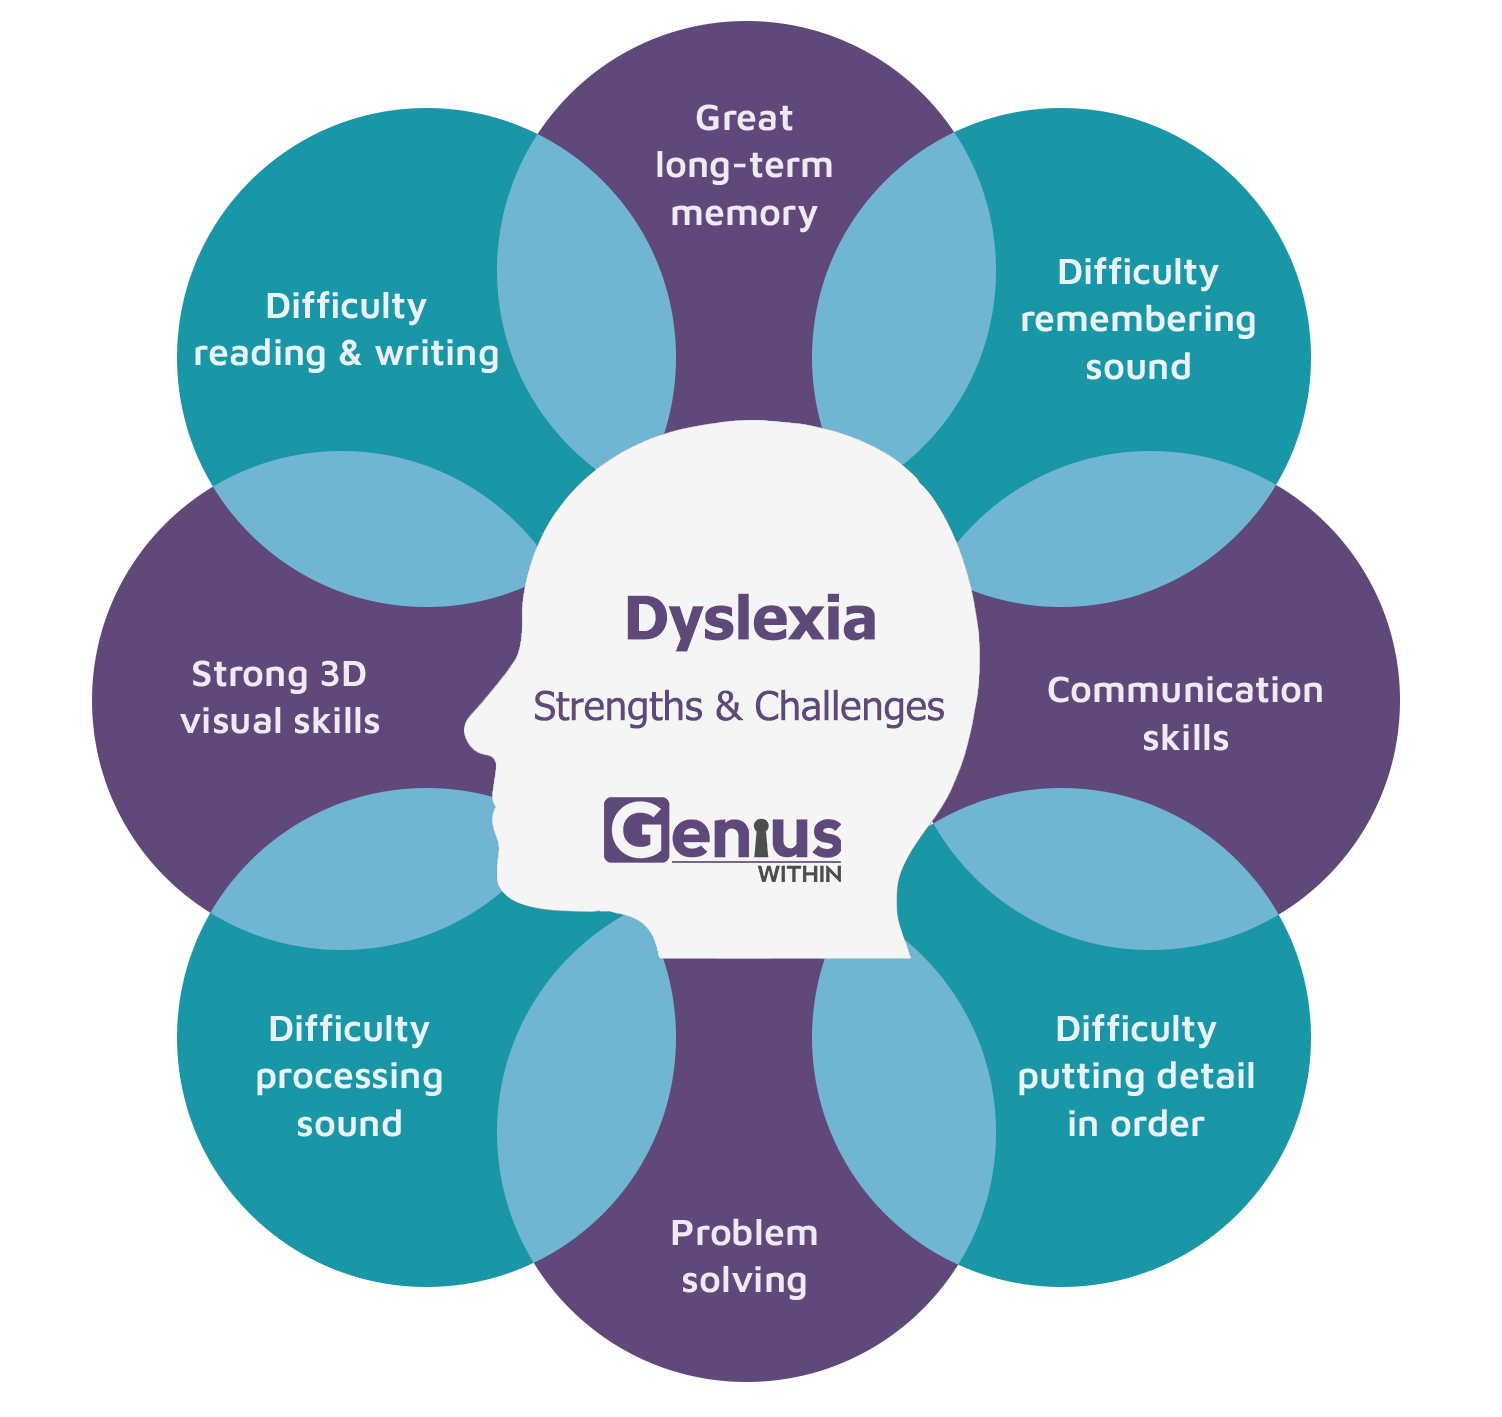 Info graphic with head at the centre and overlapping text bubbles in a circle around it. Title reads: Dyslexia, strengths and challenges. The strengths and challenges are listed as follows; Great long-term memory, difficulty remembering sound, communication skills, difficulty putting detail in order, problem solving, difficulty processing sound, strong 3D visual skills, difficulty reading and writing.